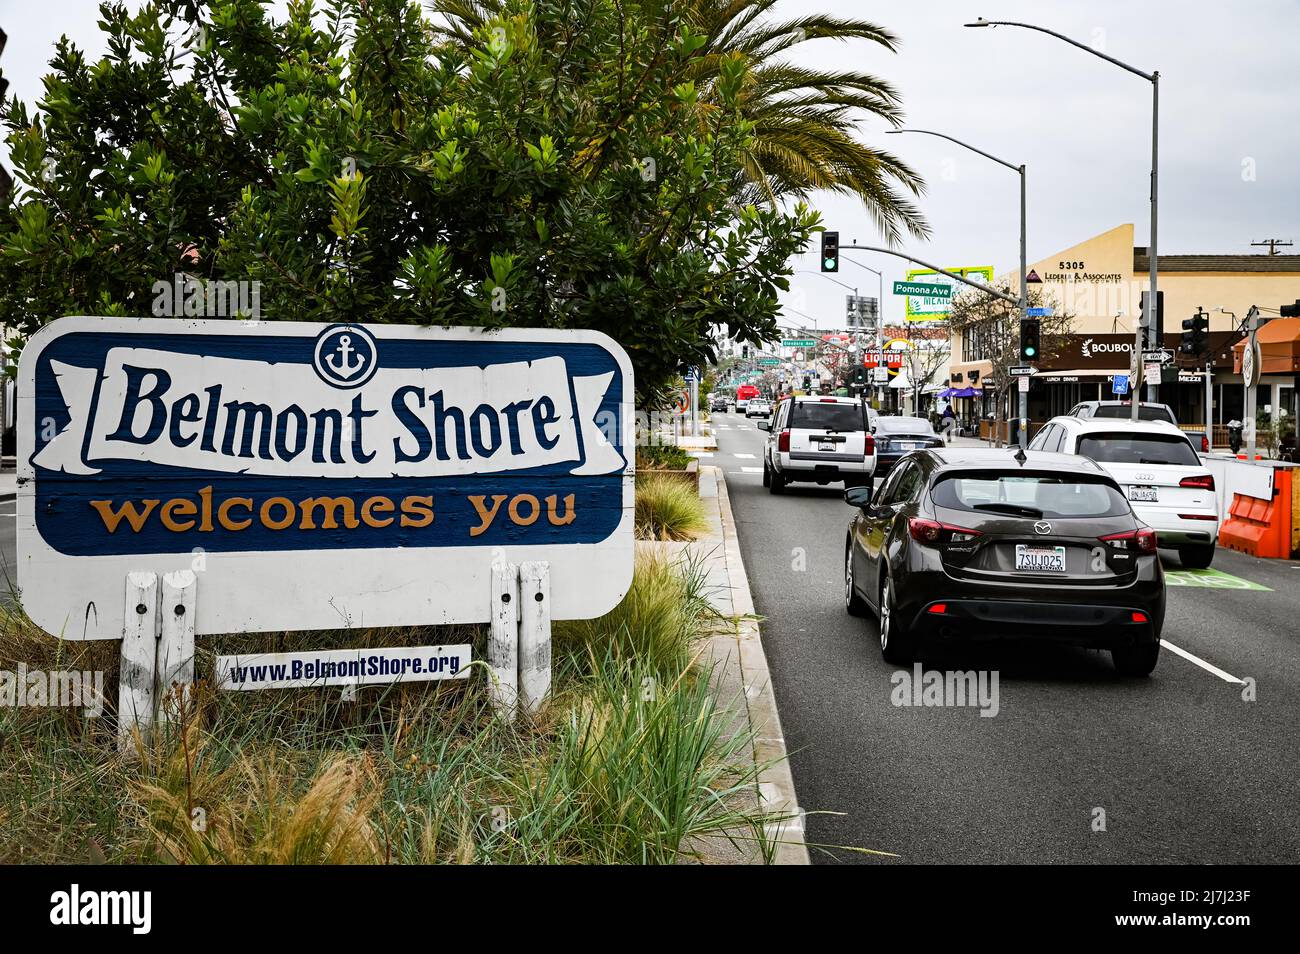 Photo of the Belmont Shore welcome sign on second street, the popular shopping district in the upscale beach neighborhood. Stock Photo